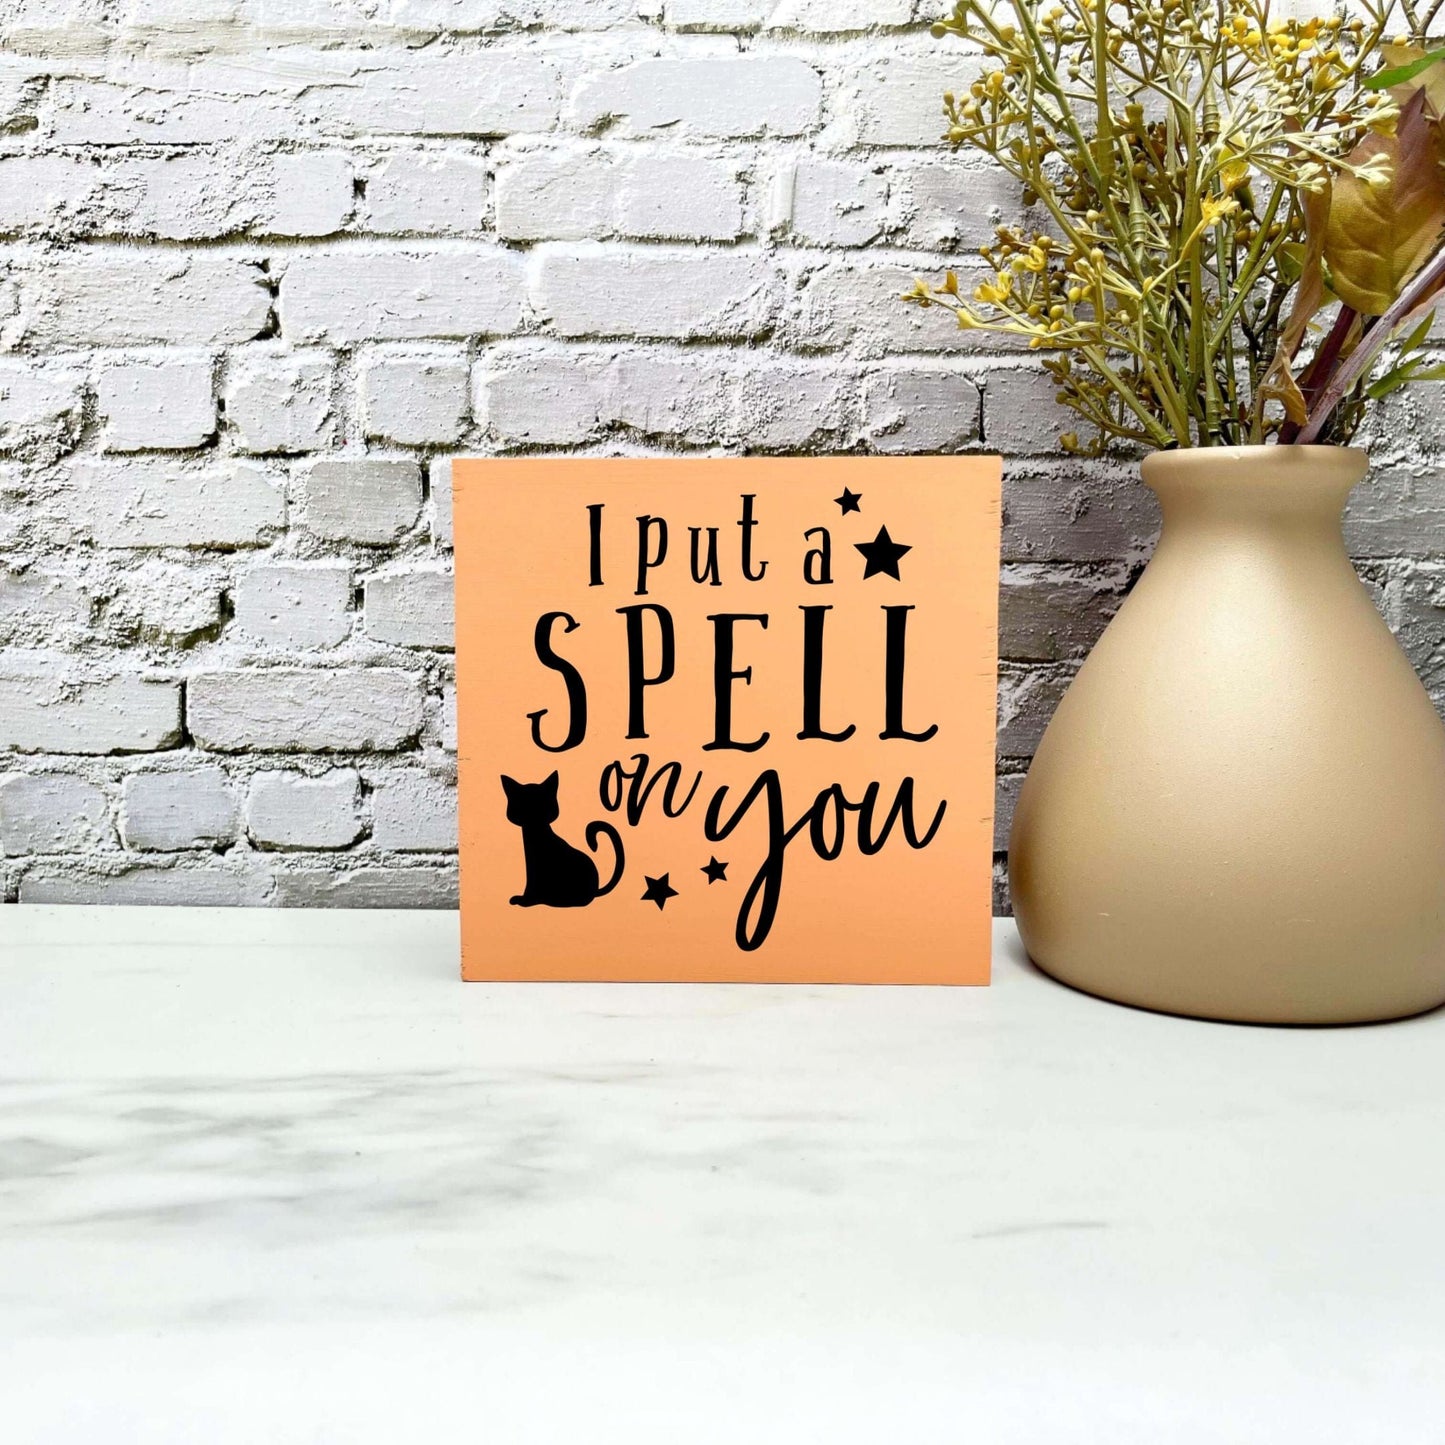 I put a spell on you Wood Sign, Halloween Wood Sign, Halloween Home Decor, Spooky Decor